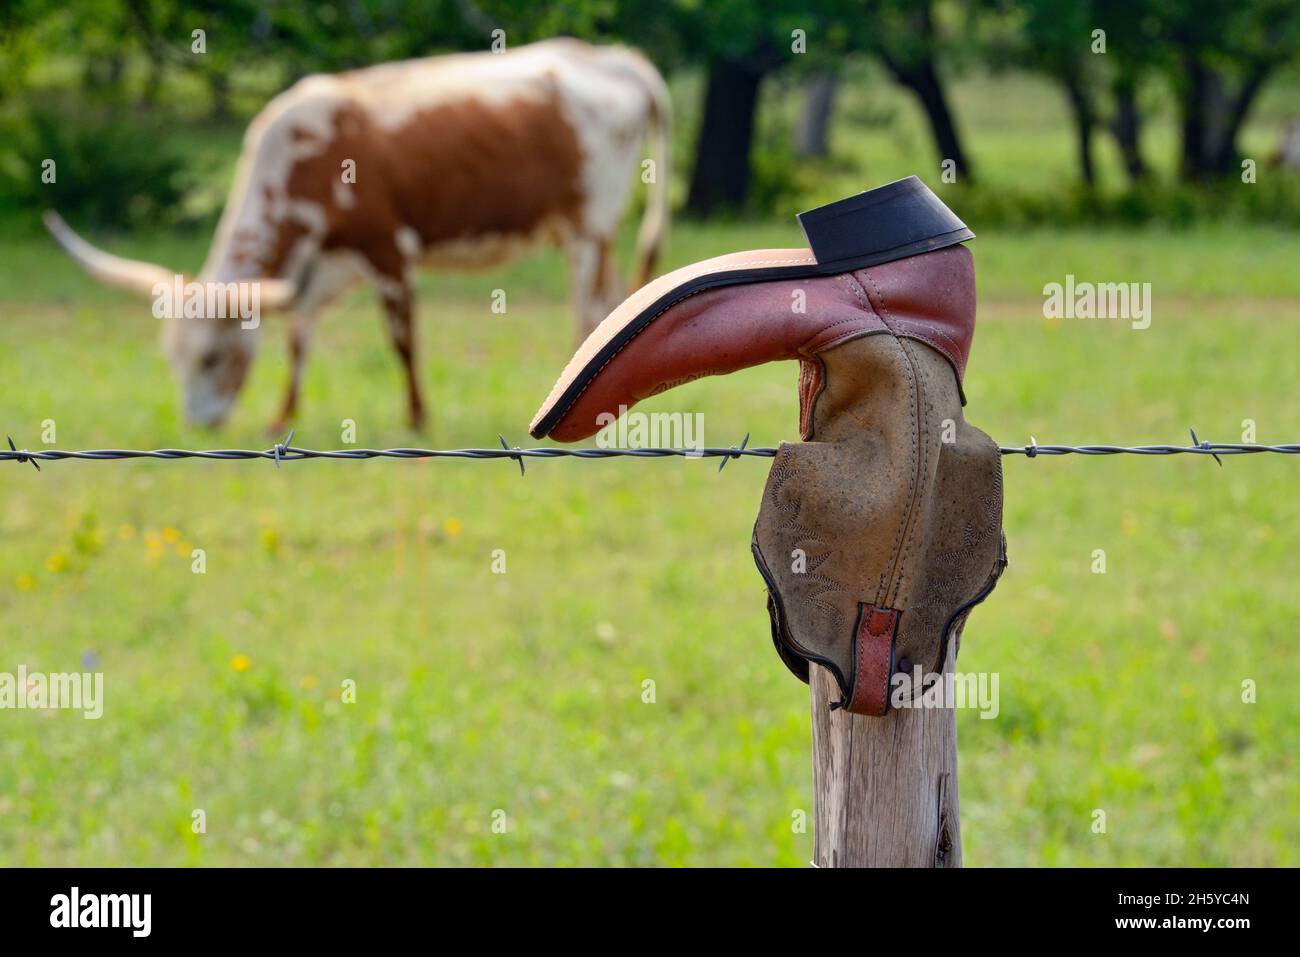 Cowboy boots on fenceposts, Willow City, Texas, USA Stock Photo